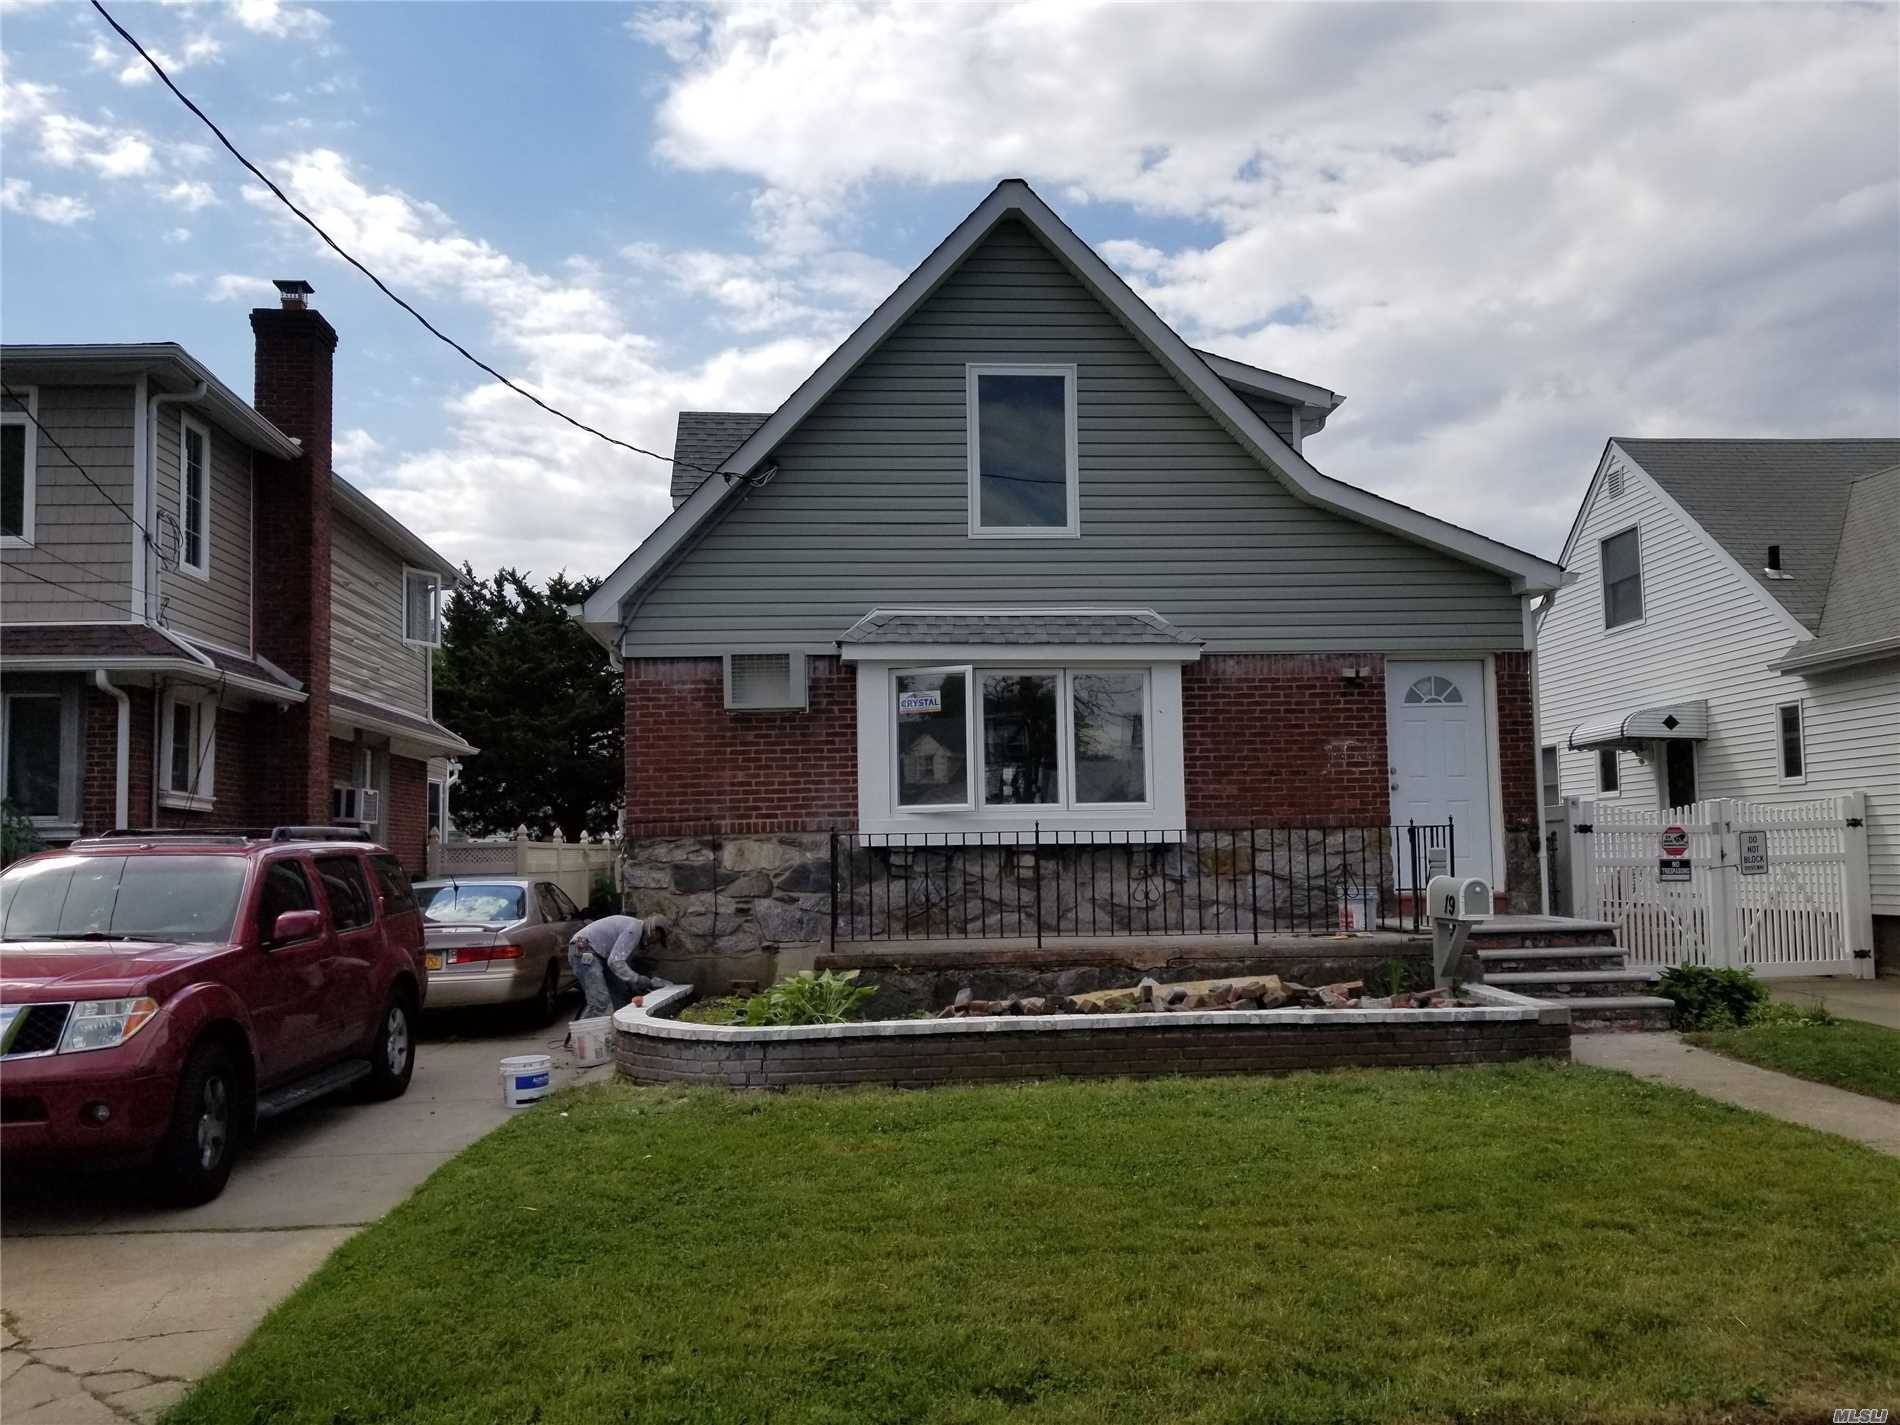 Aaa Mint Condition, Fully Renovated New Electrical New Plumbing, New Hardwood Floor.